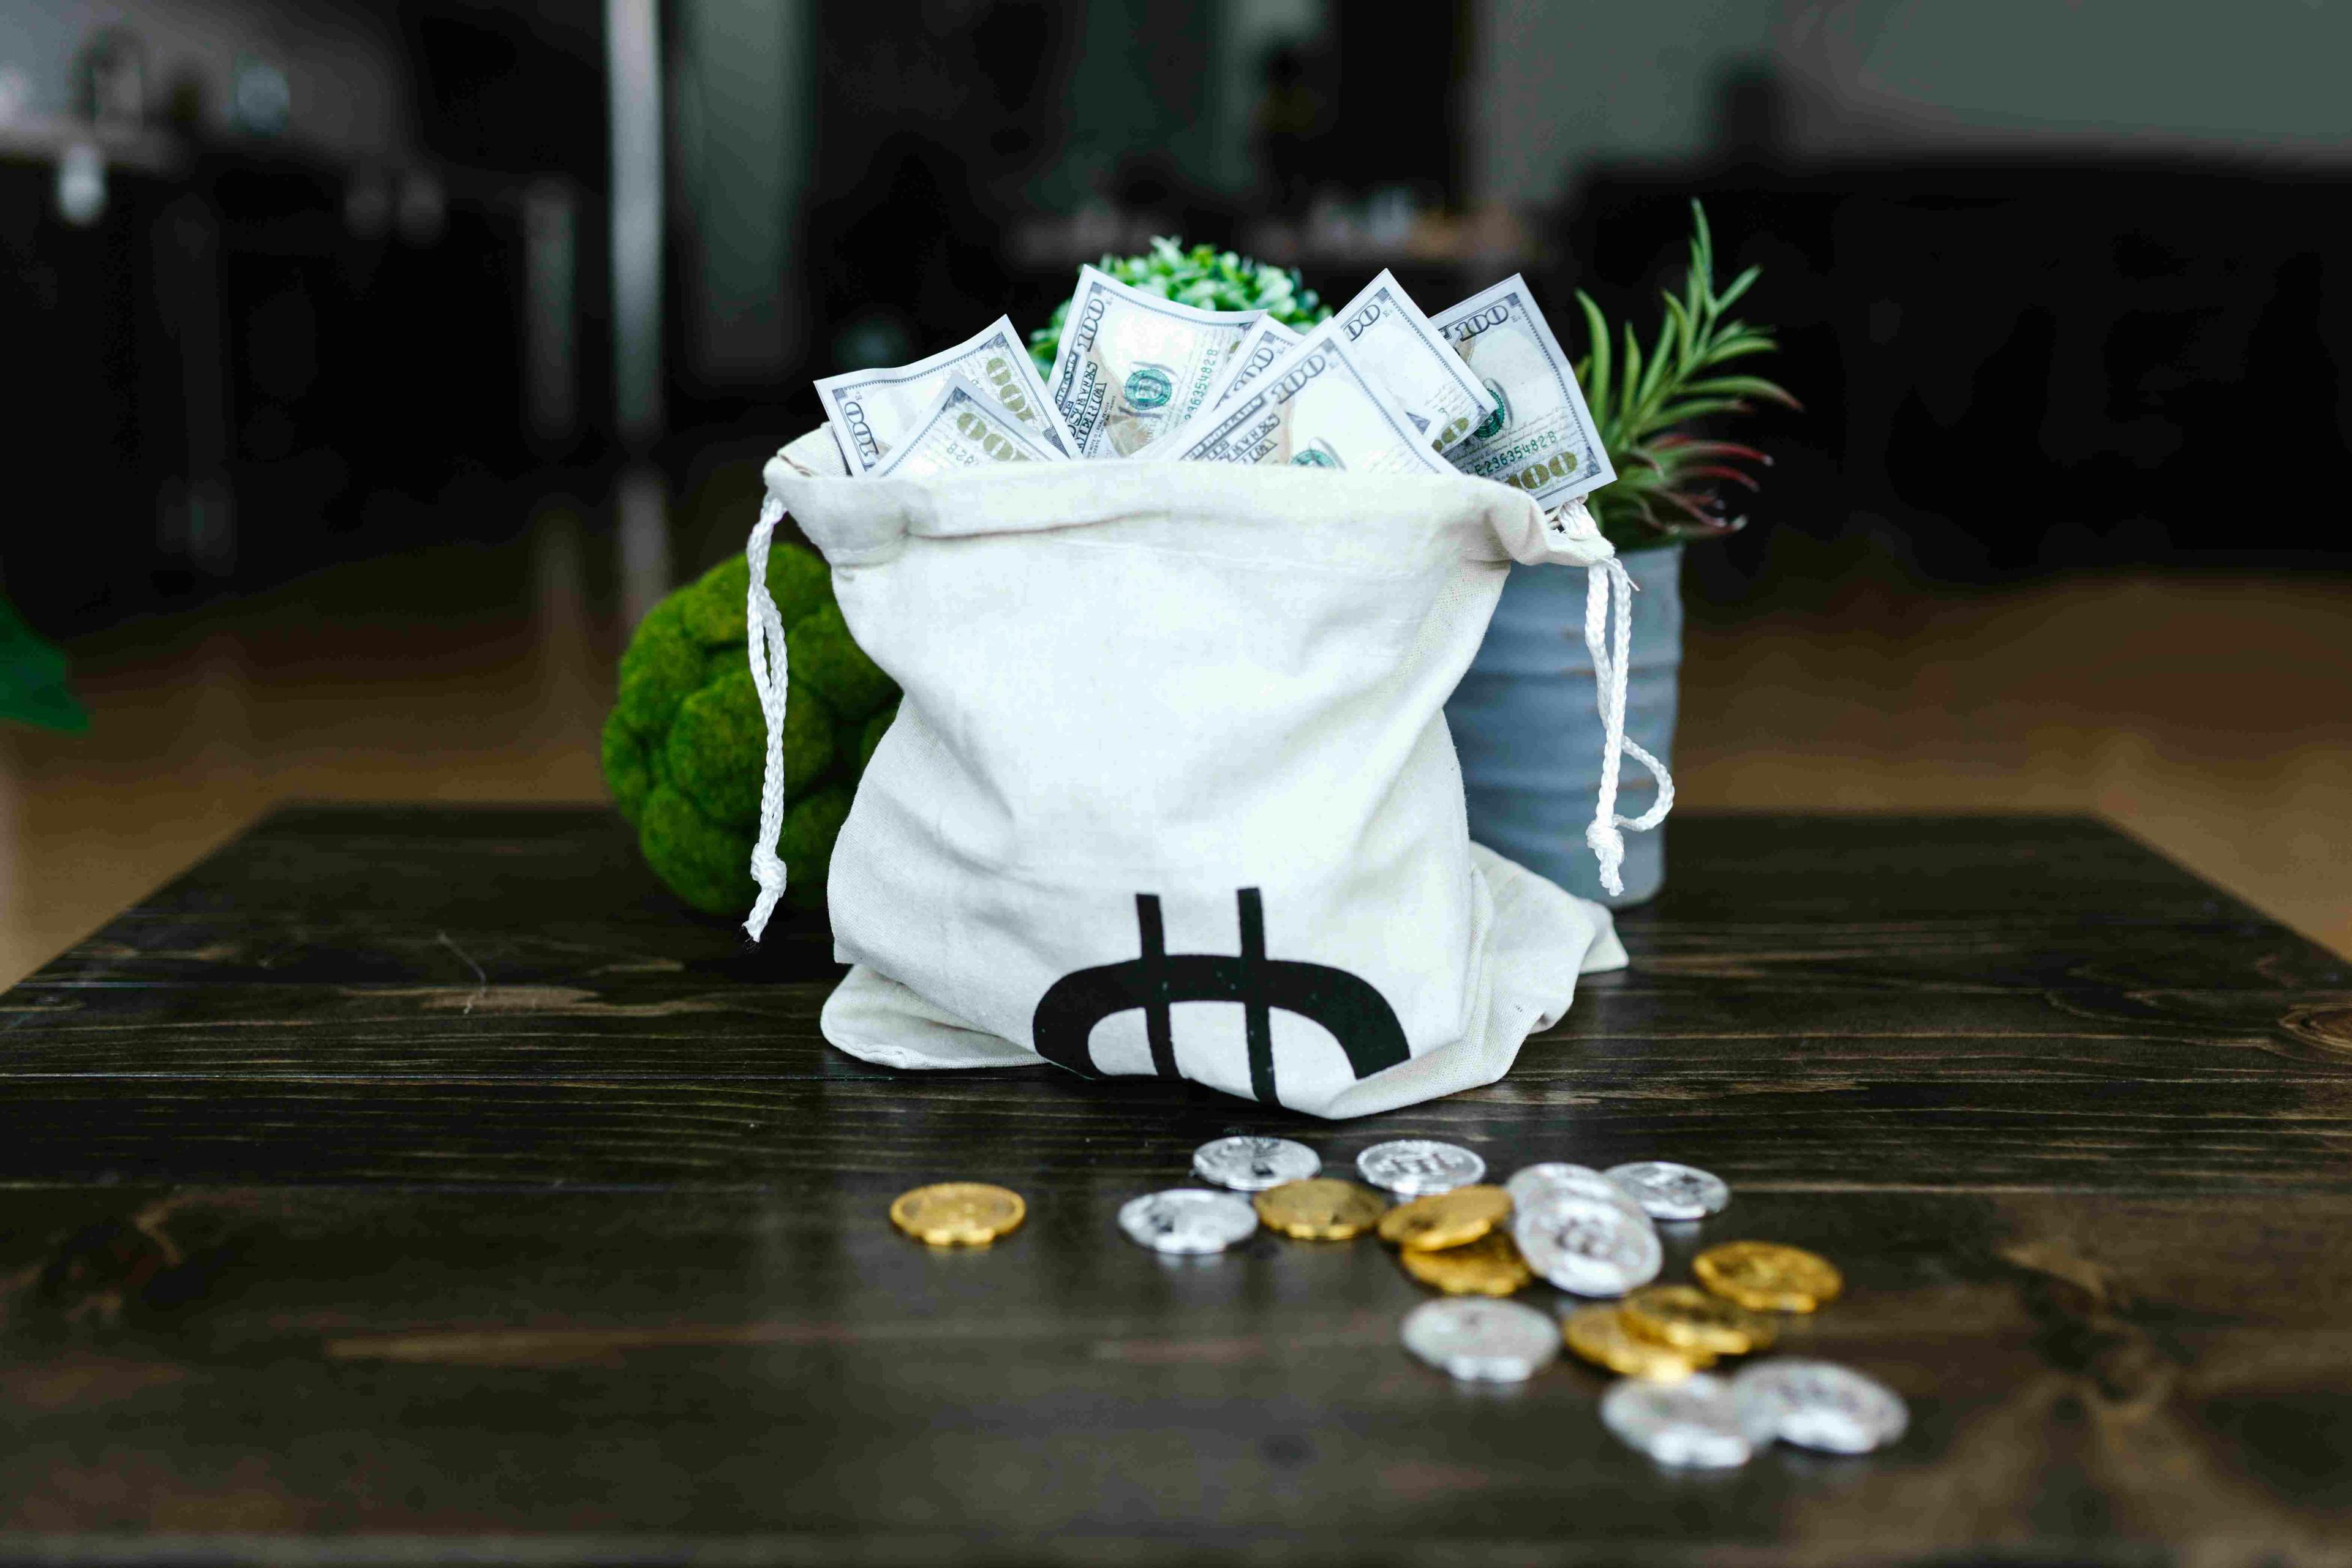 A white money bag filled with stacks of cash next to some gold and silver coin showing the Bitcoin logo all on a brown table.